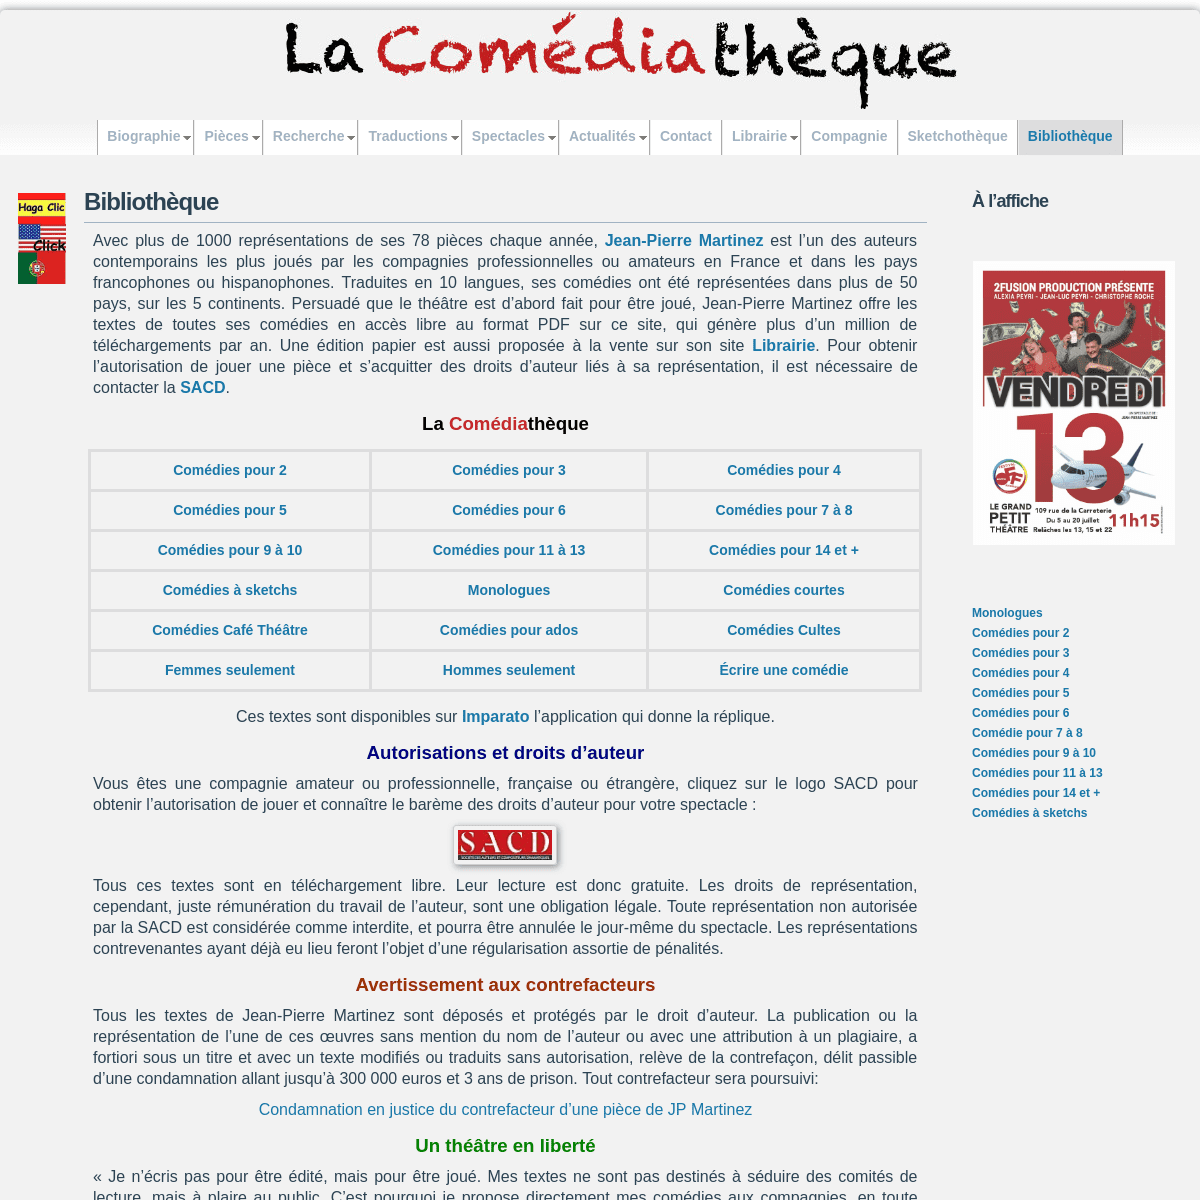 A complete backup of comediatheque.net